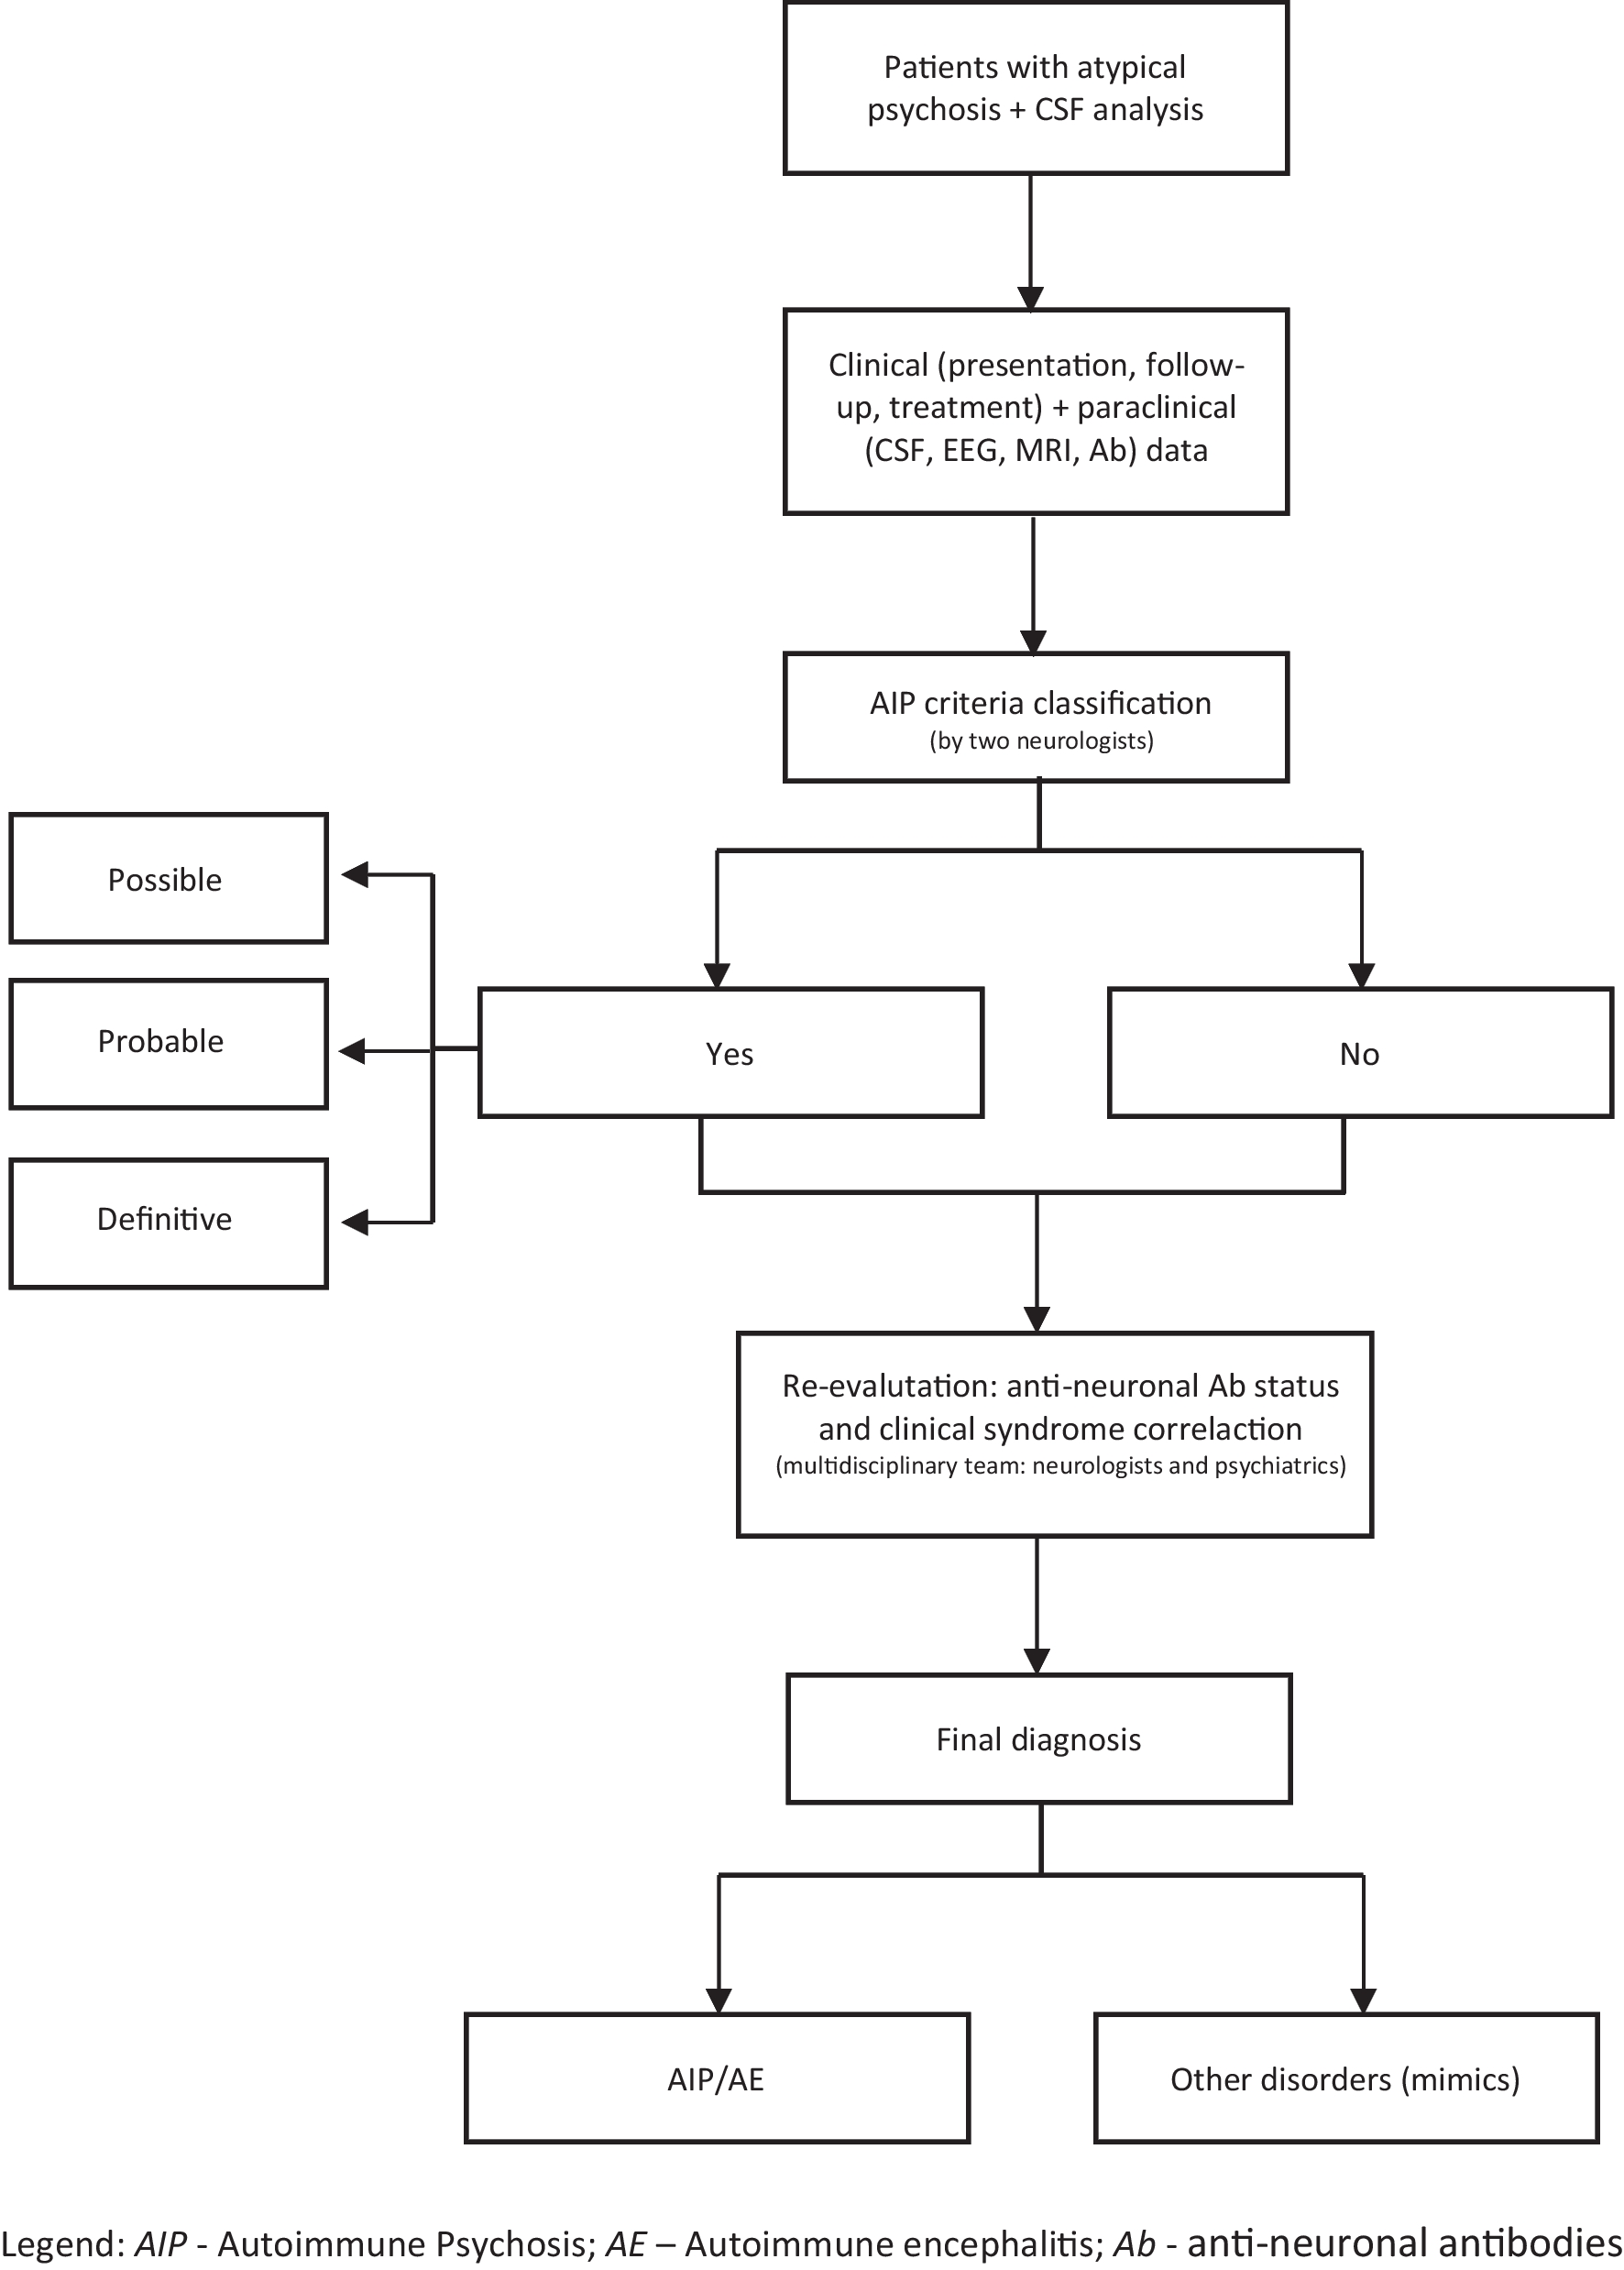 Blood and CSF anti-neuronal antibodies testing in psychotic syndromes: a retrospective analysis from a tertiary psychiatric hospital